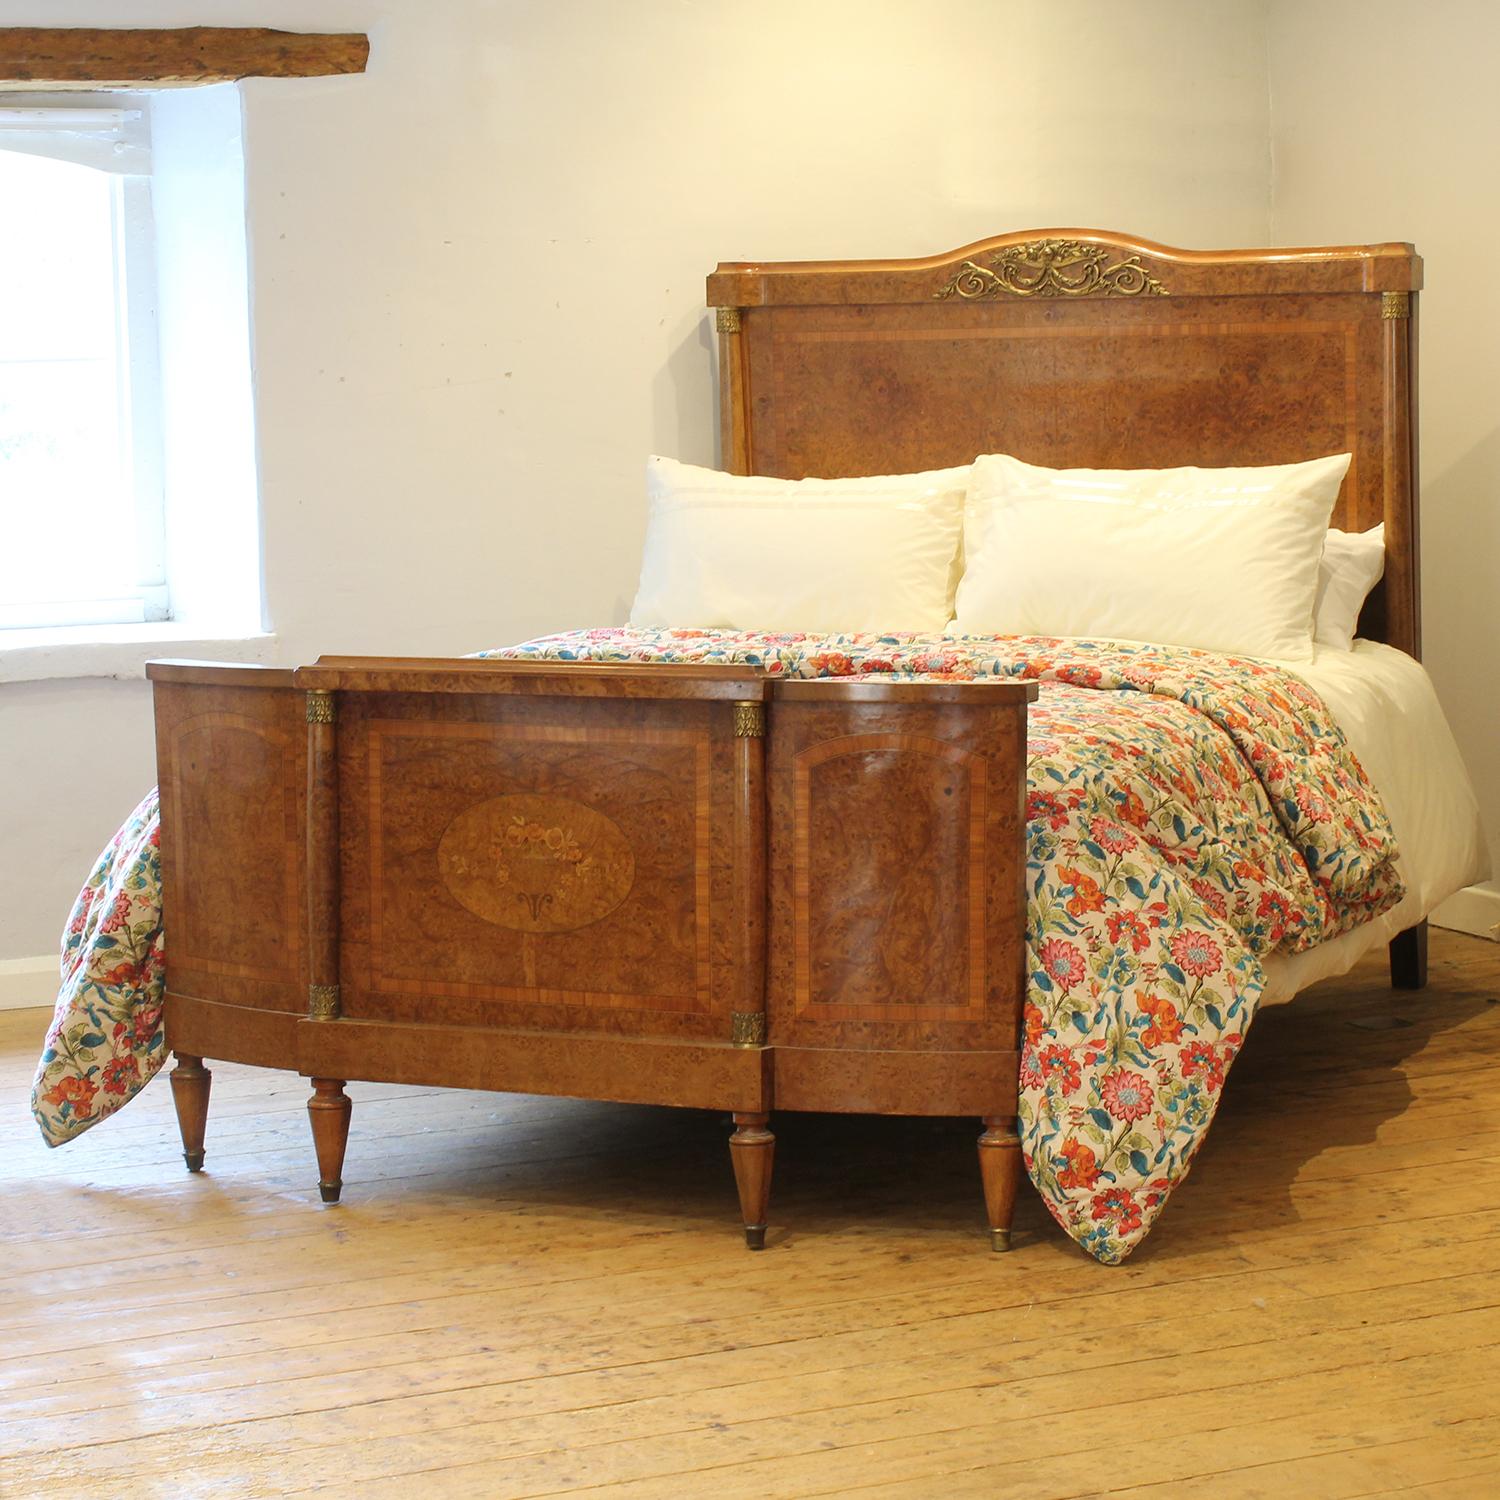 A superb example of an Art Deco antique bed with attractive burr walnut veneered frame, ormolu decoration, classical columned posts and delicate fruitwood inlay depicting an urn with flowers.

This bed accepts a US Queen Size (or UK King Size), 5ft